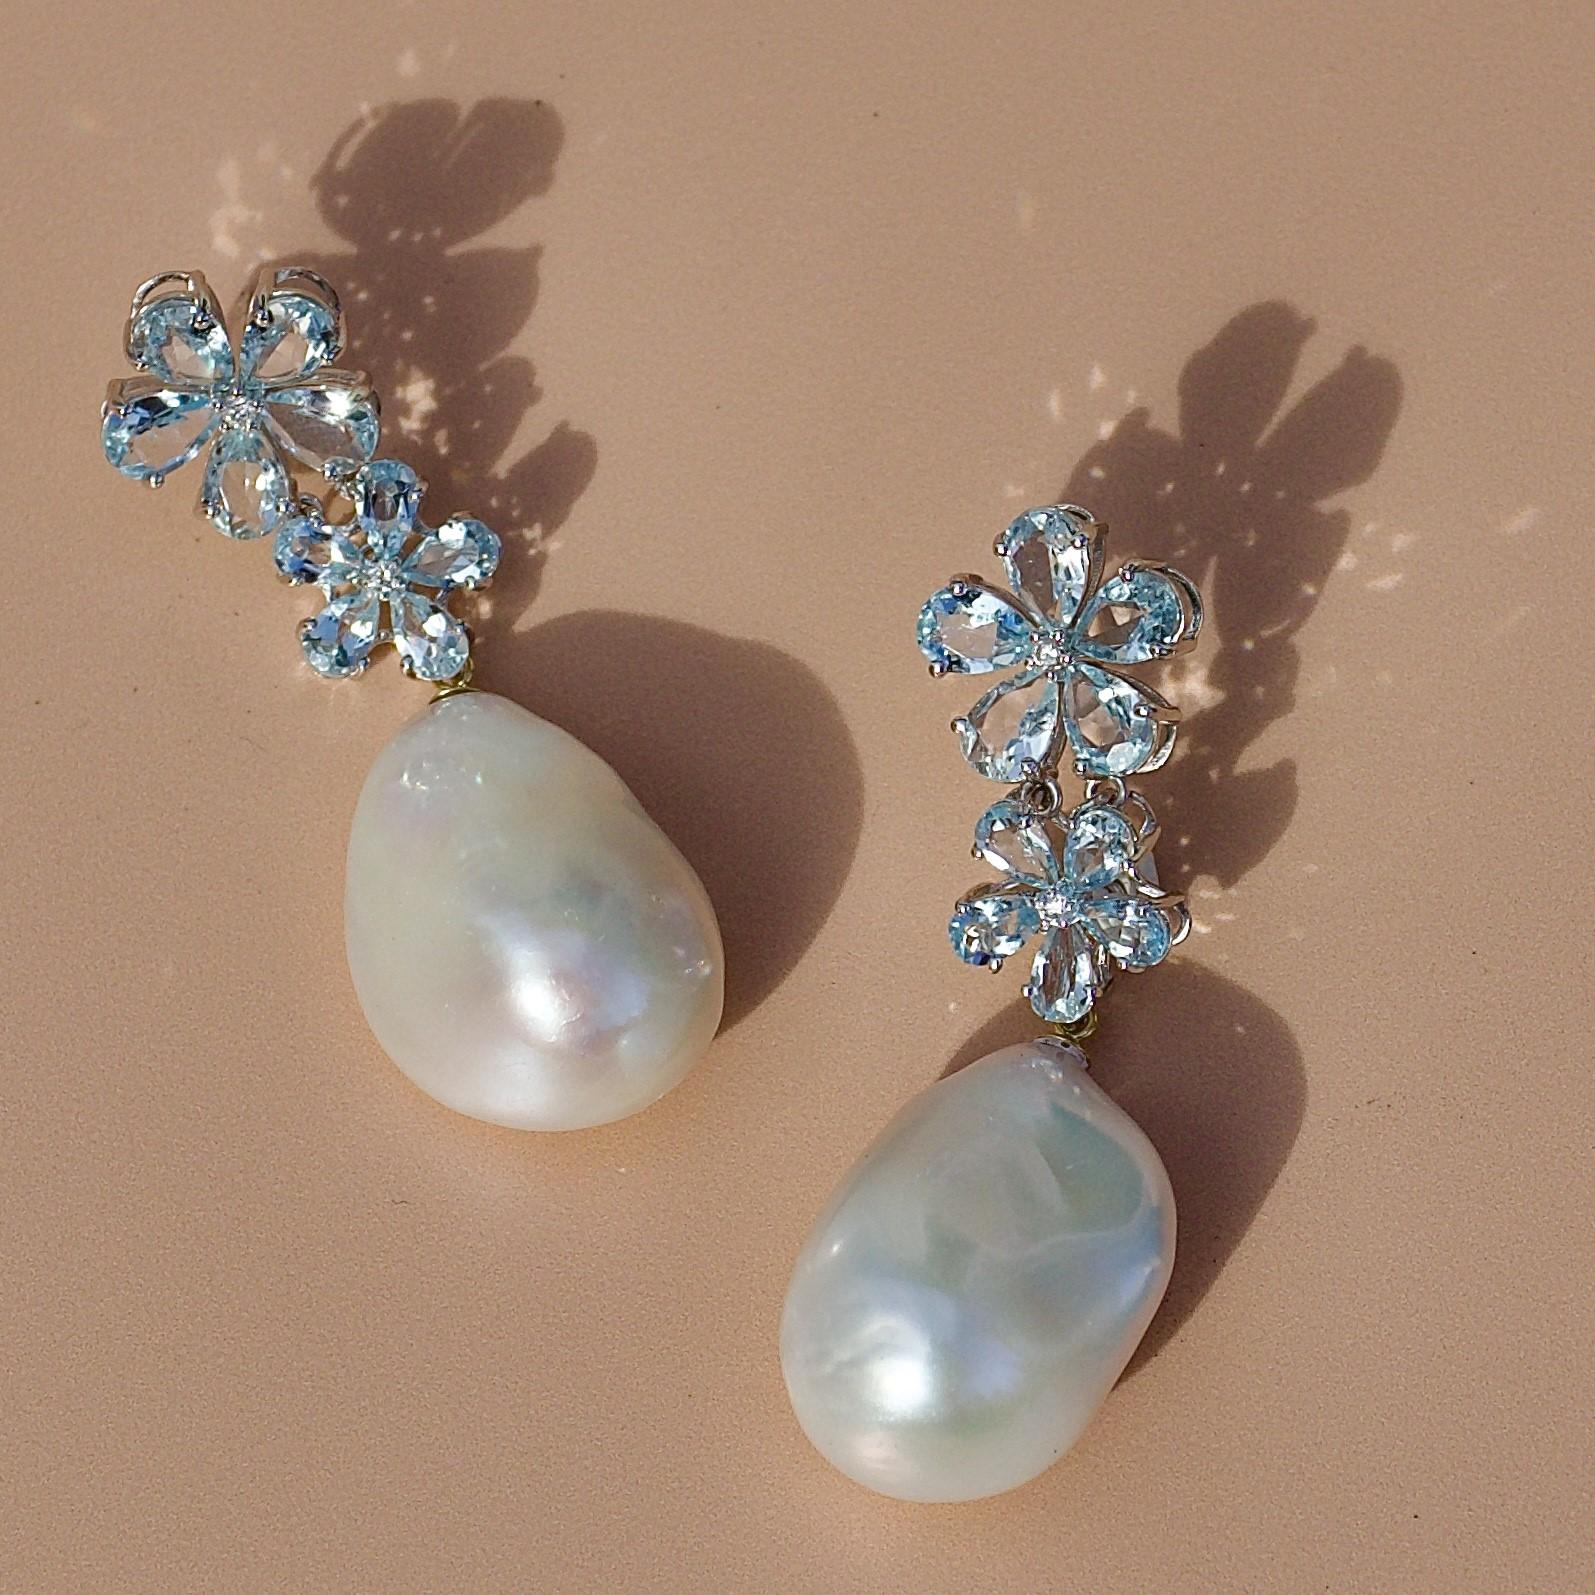 Discover Nina Zhou Aquamarine Diamond Blossom Baroque Pearl Convertible Drop Earrings in 18k White Gold. These earrings blend the serene glow of aquamarine with the timeless sparkle of diamonds, all cradled in a delicate, nature-inspired blossom